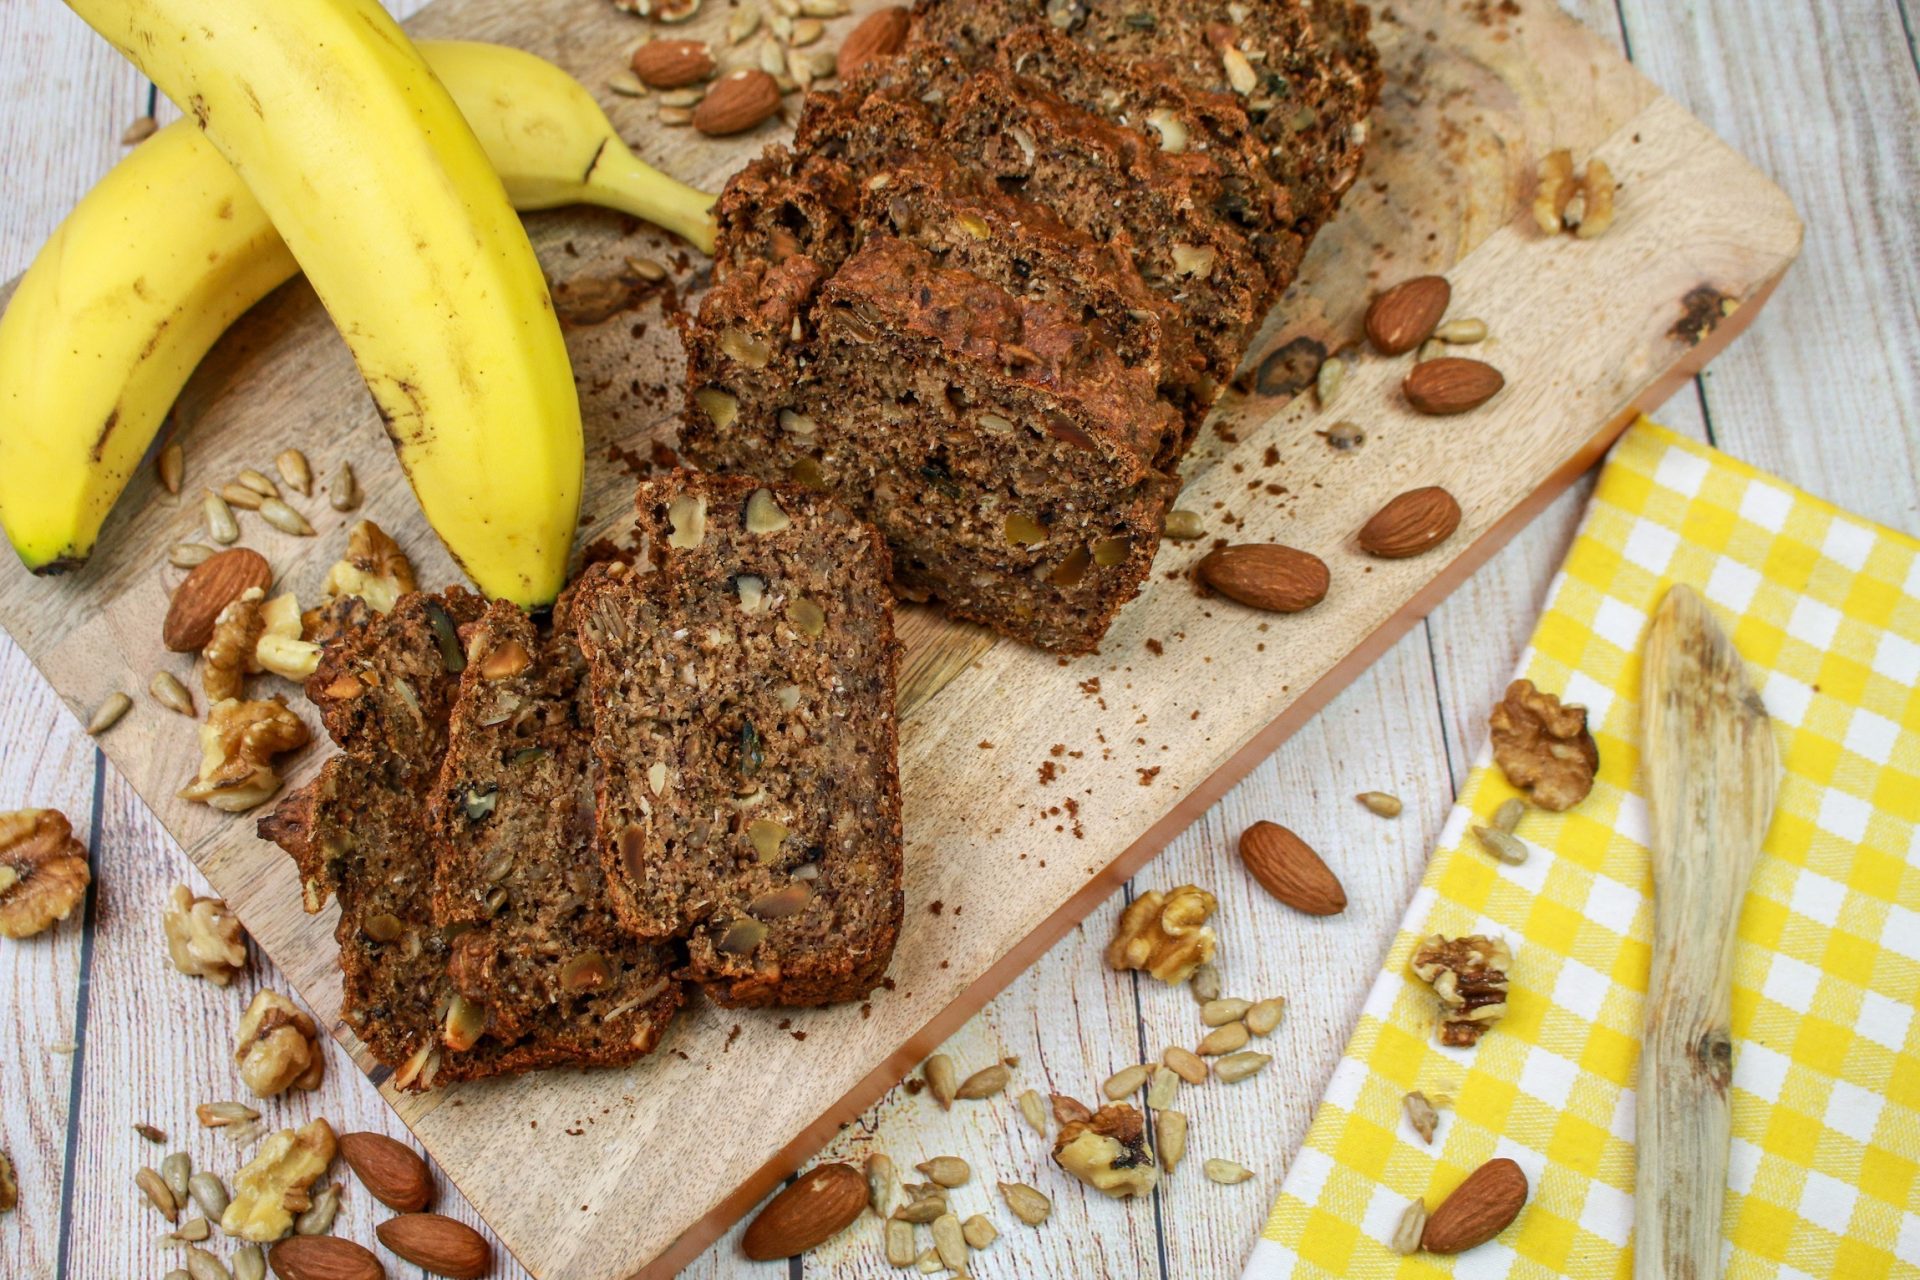 Banana Bread is a classic comfort food that takes full advantage of the tra...